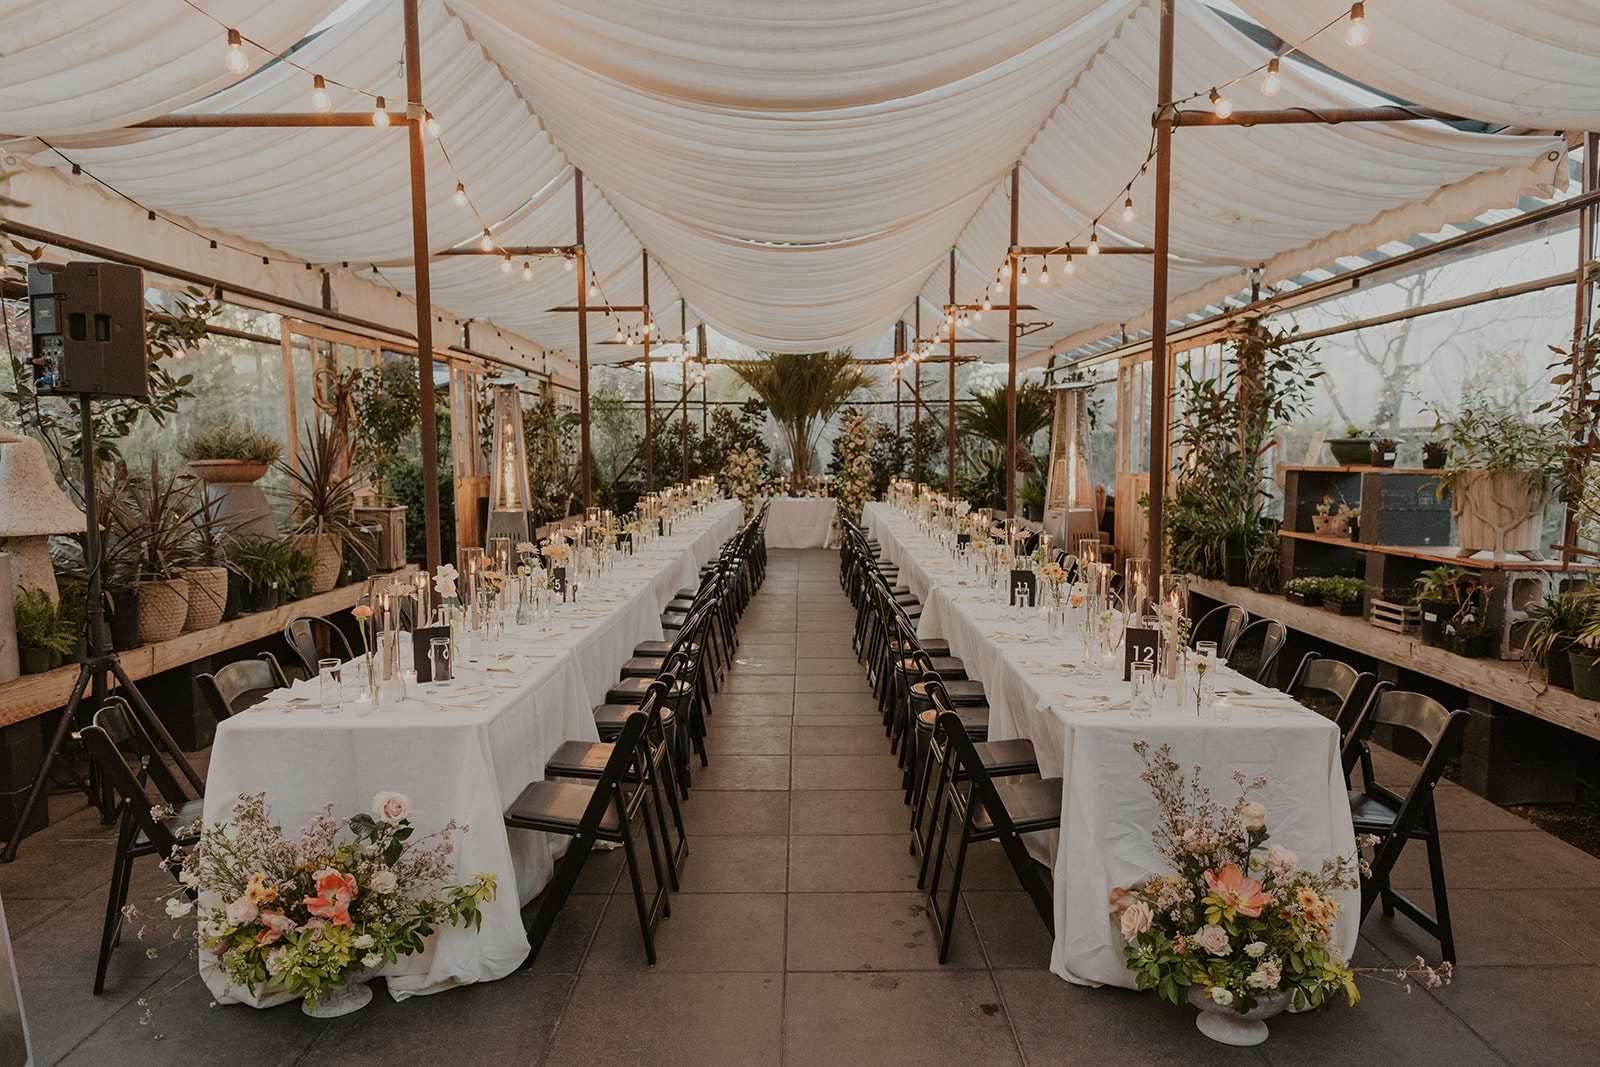 Outdoor wedding reception in Oregon with 2 long dining tables with white linen and black chairs at a Portland Oregon Greenhouse Venue